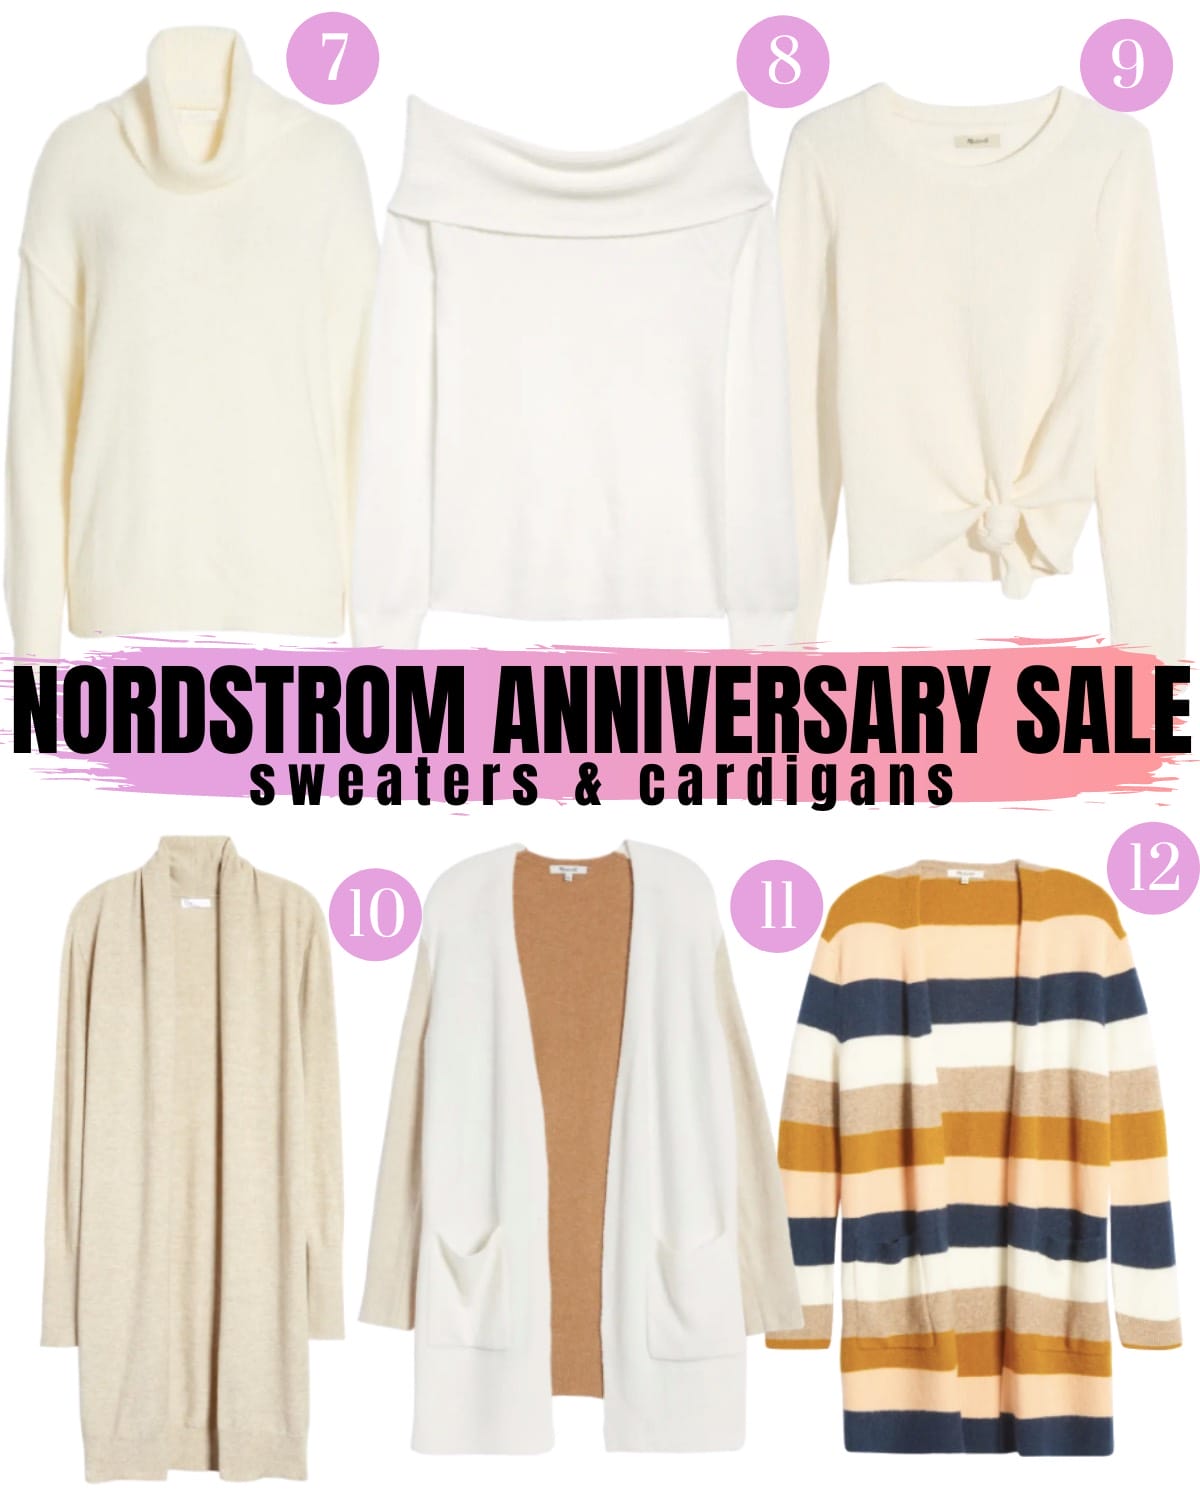 Nordstrom Anniversary Sale 2020 sweaters and cardigans